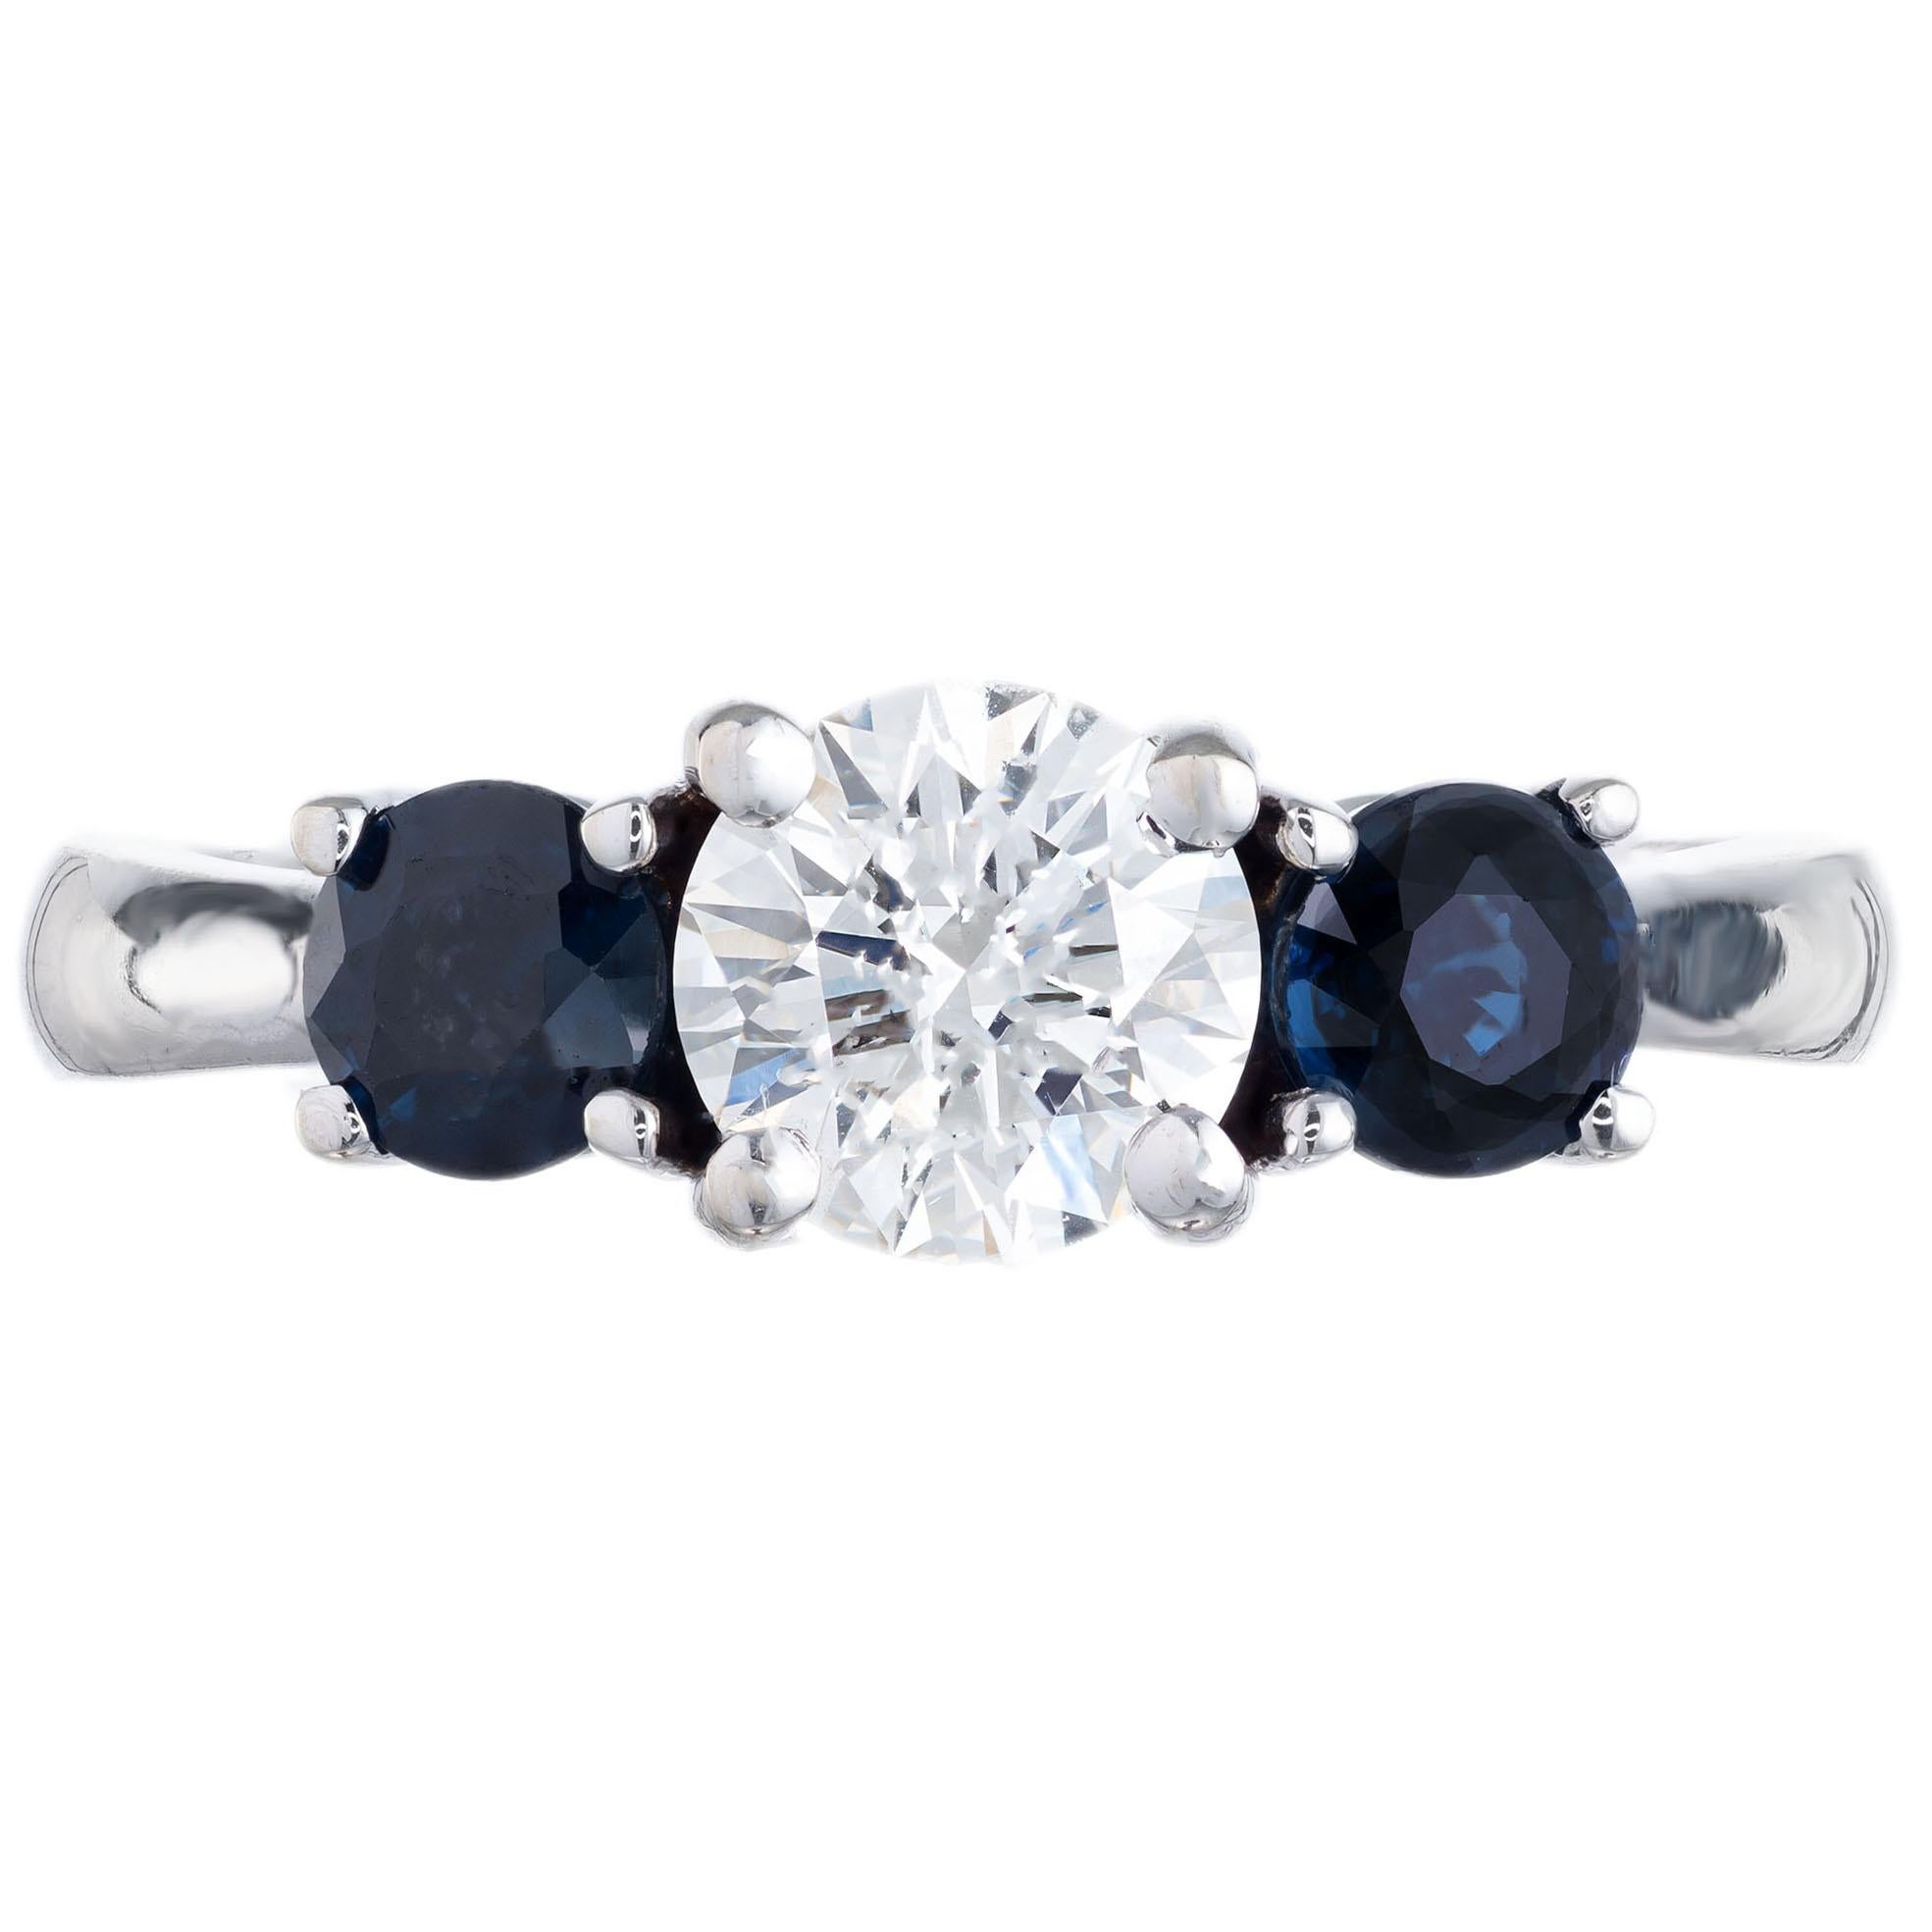 GIA certified center diamond with two round side sapphires in a 14k white gold three-stone setting. Created in the Peter Suchy Workshop. 

1 round Ideal cut diamond approx. total weight .73cts, J, VS2, Table: 56% Depth: 60.9%.  GIA # 213101406
2